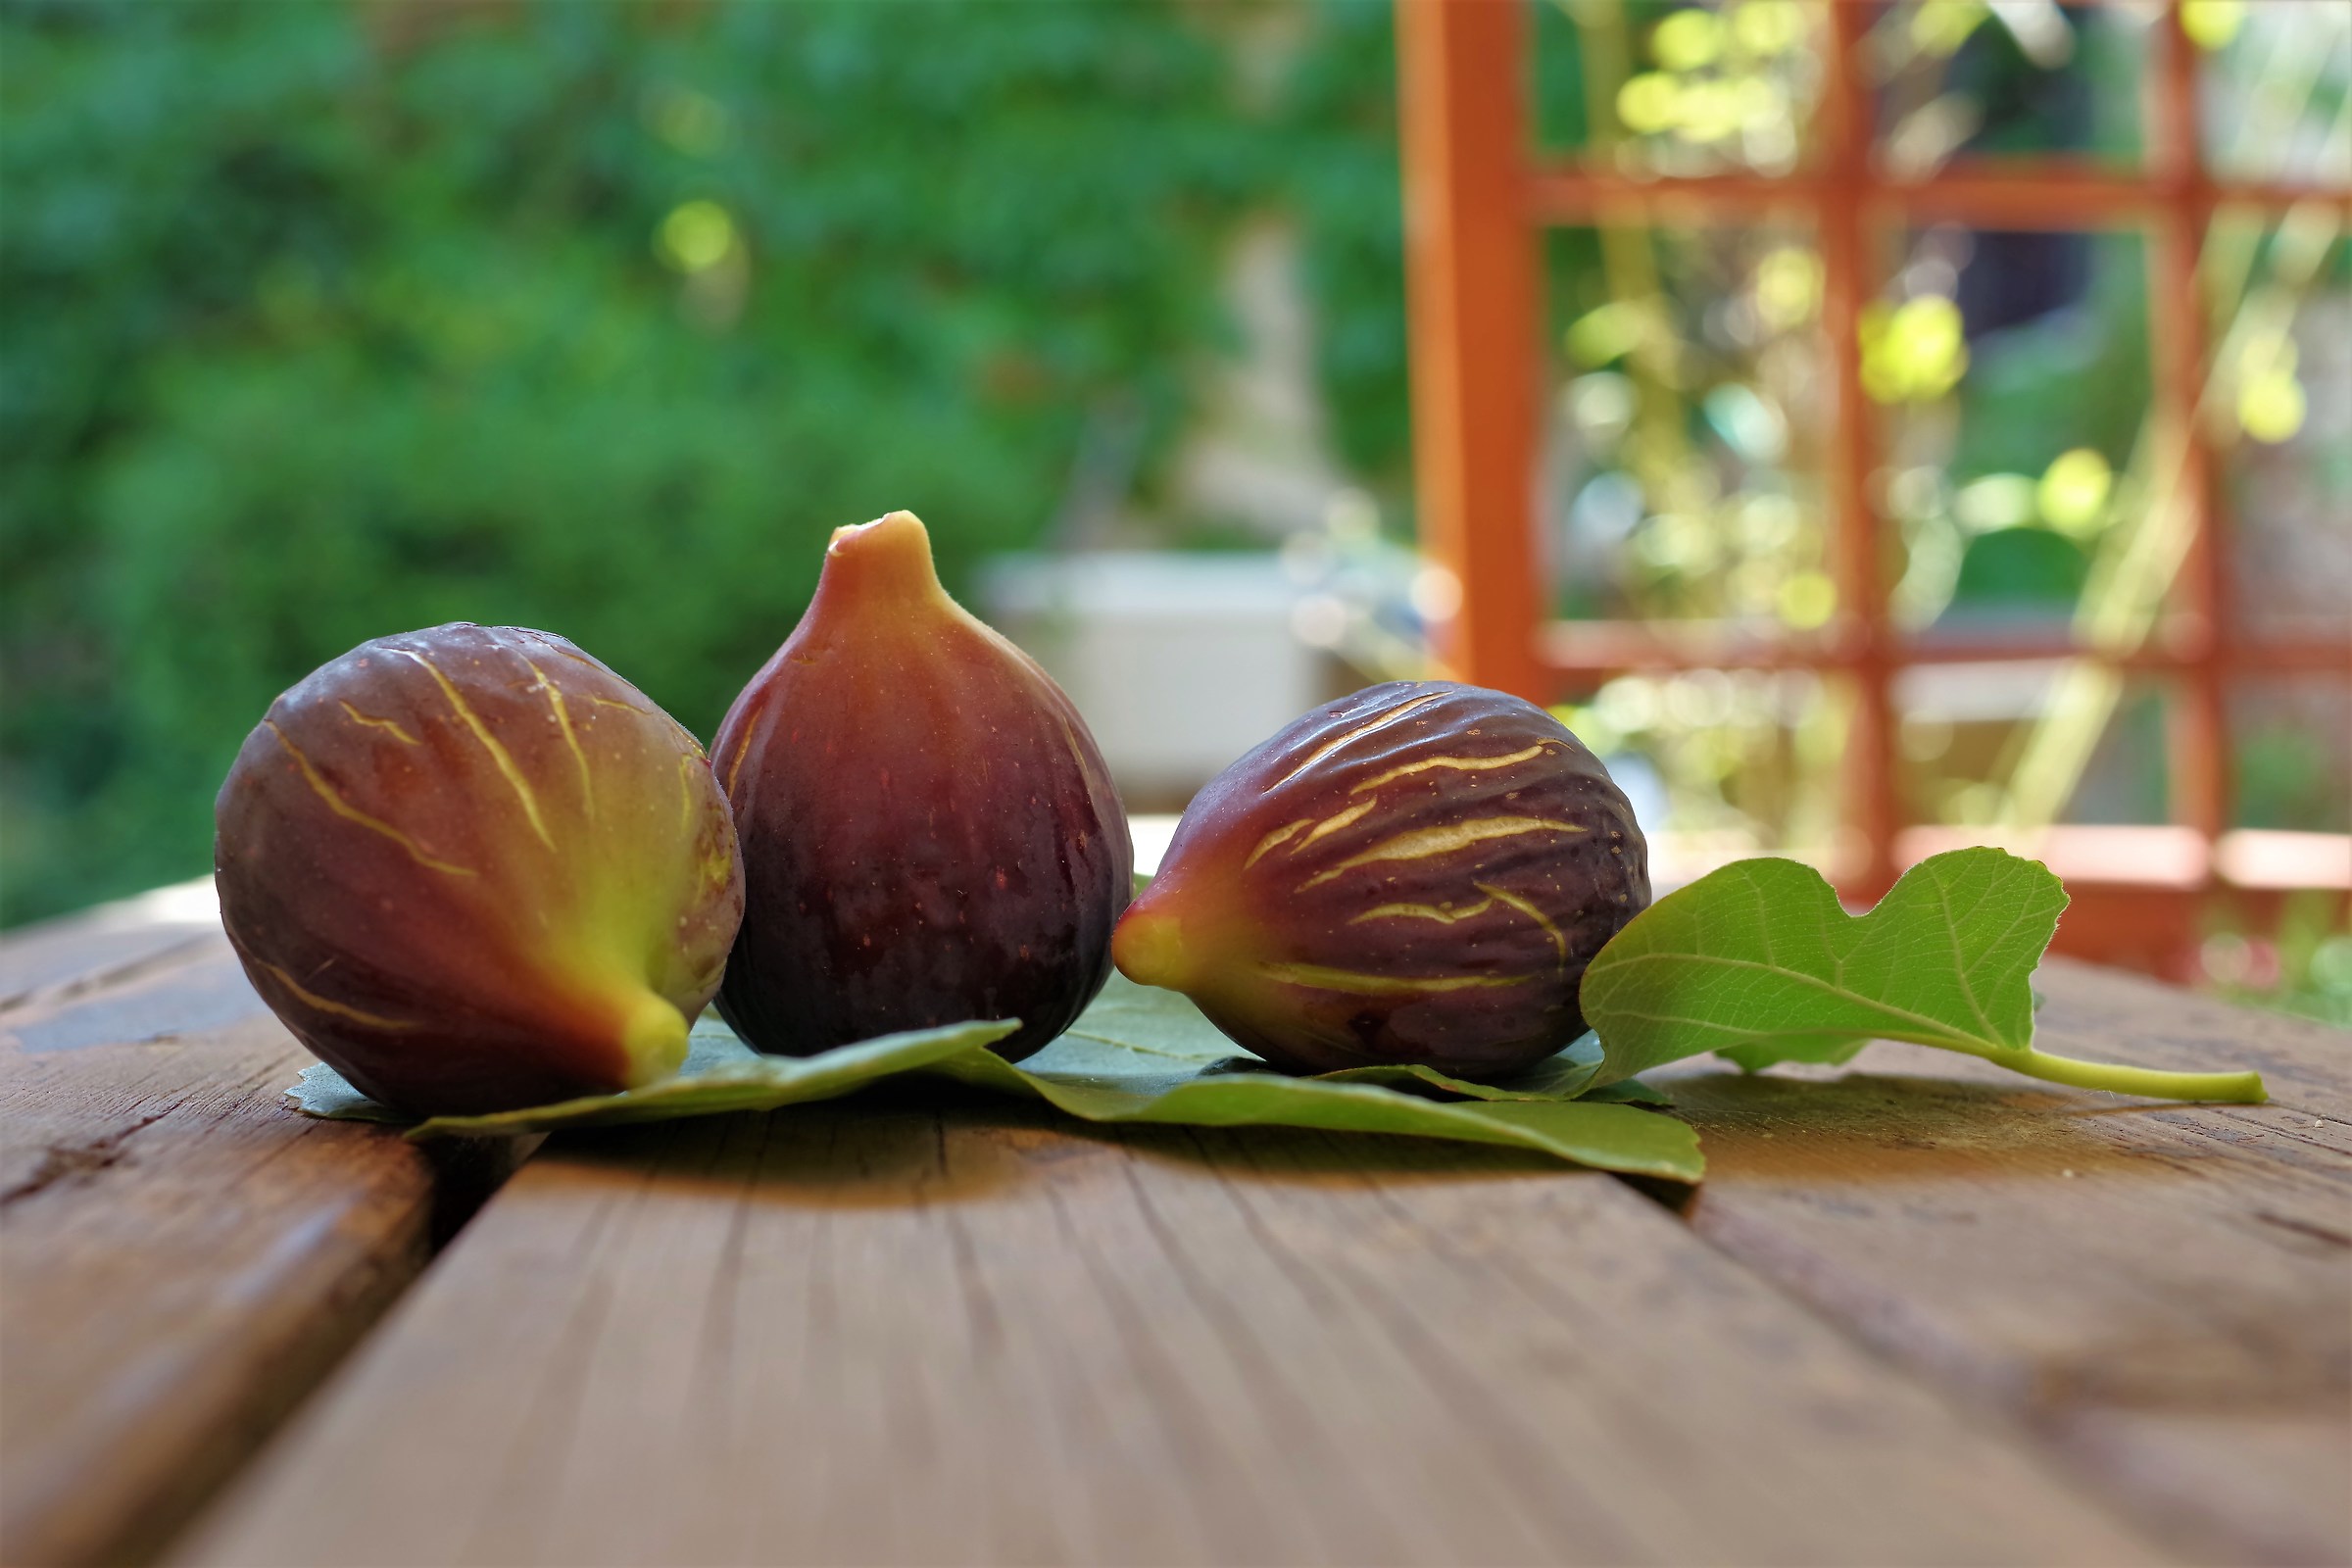 Freshly picked figs...